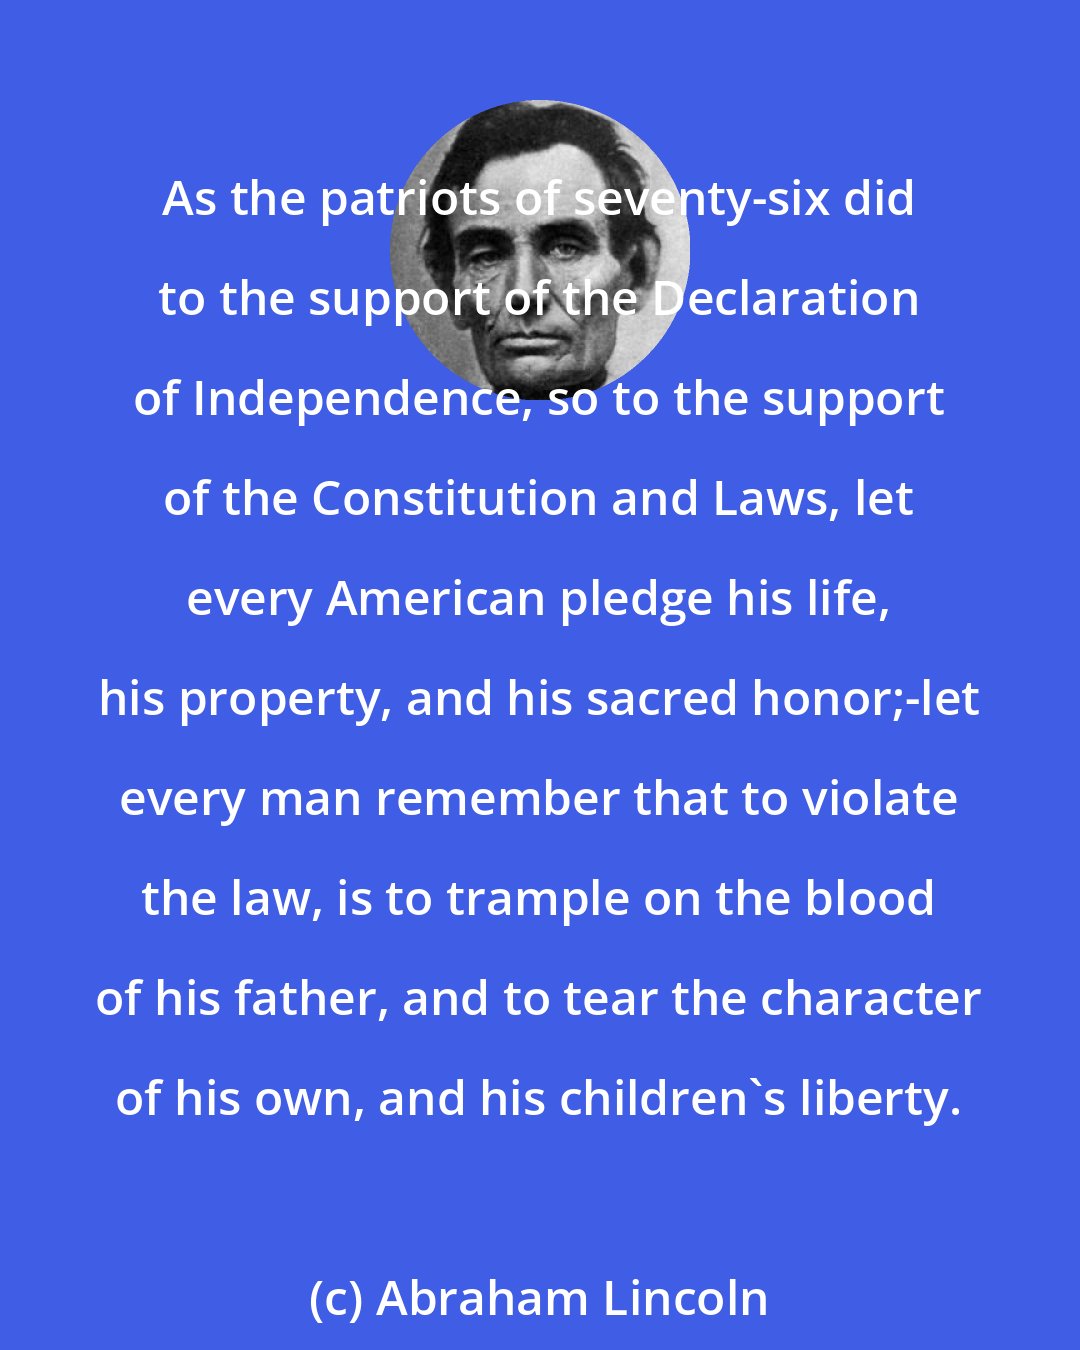 Abraham Lincoln: As the patriots of seventy-six did to the support of the Declaration of Independence, so to the support of the Constitution and Laws, let every American pledge his life, his property, and his sacred honor;-let every man remember that to violate the law, is to trample on the blood of his father, and to tear the character of his own, and his children's liberty.